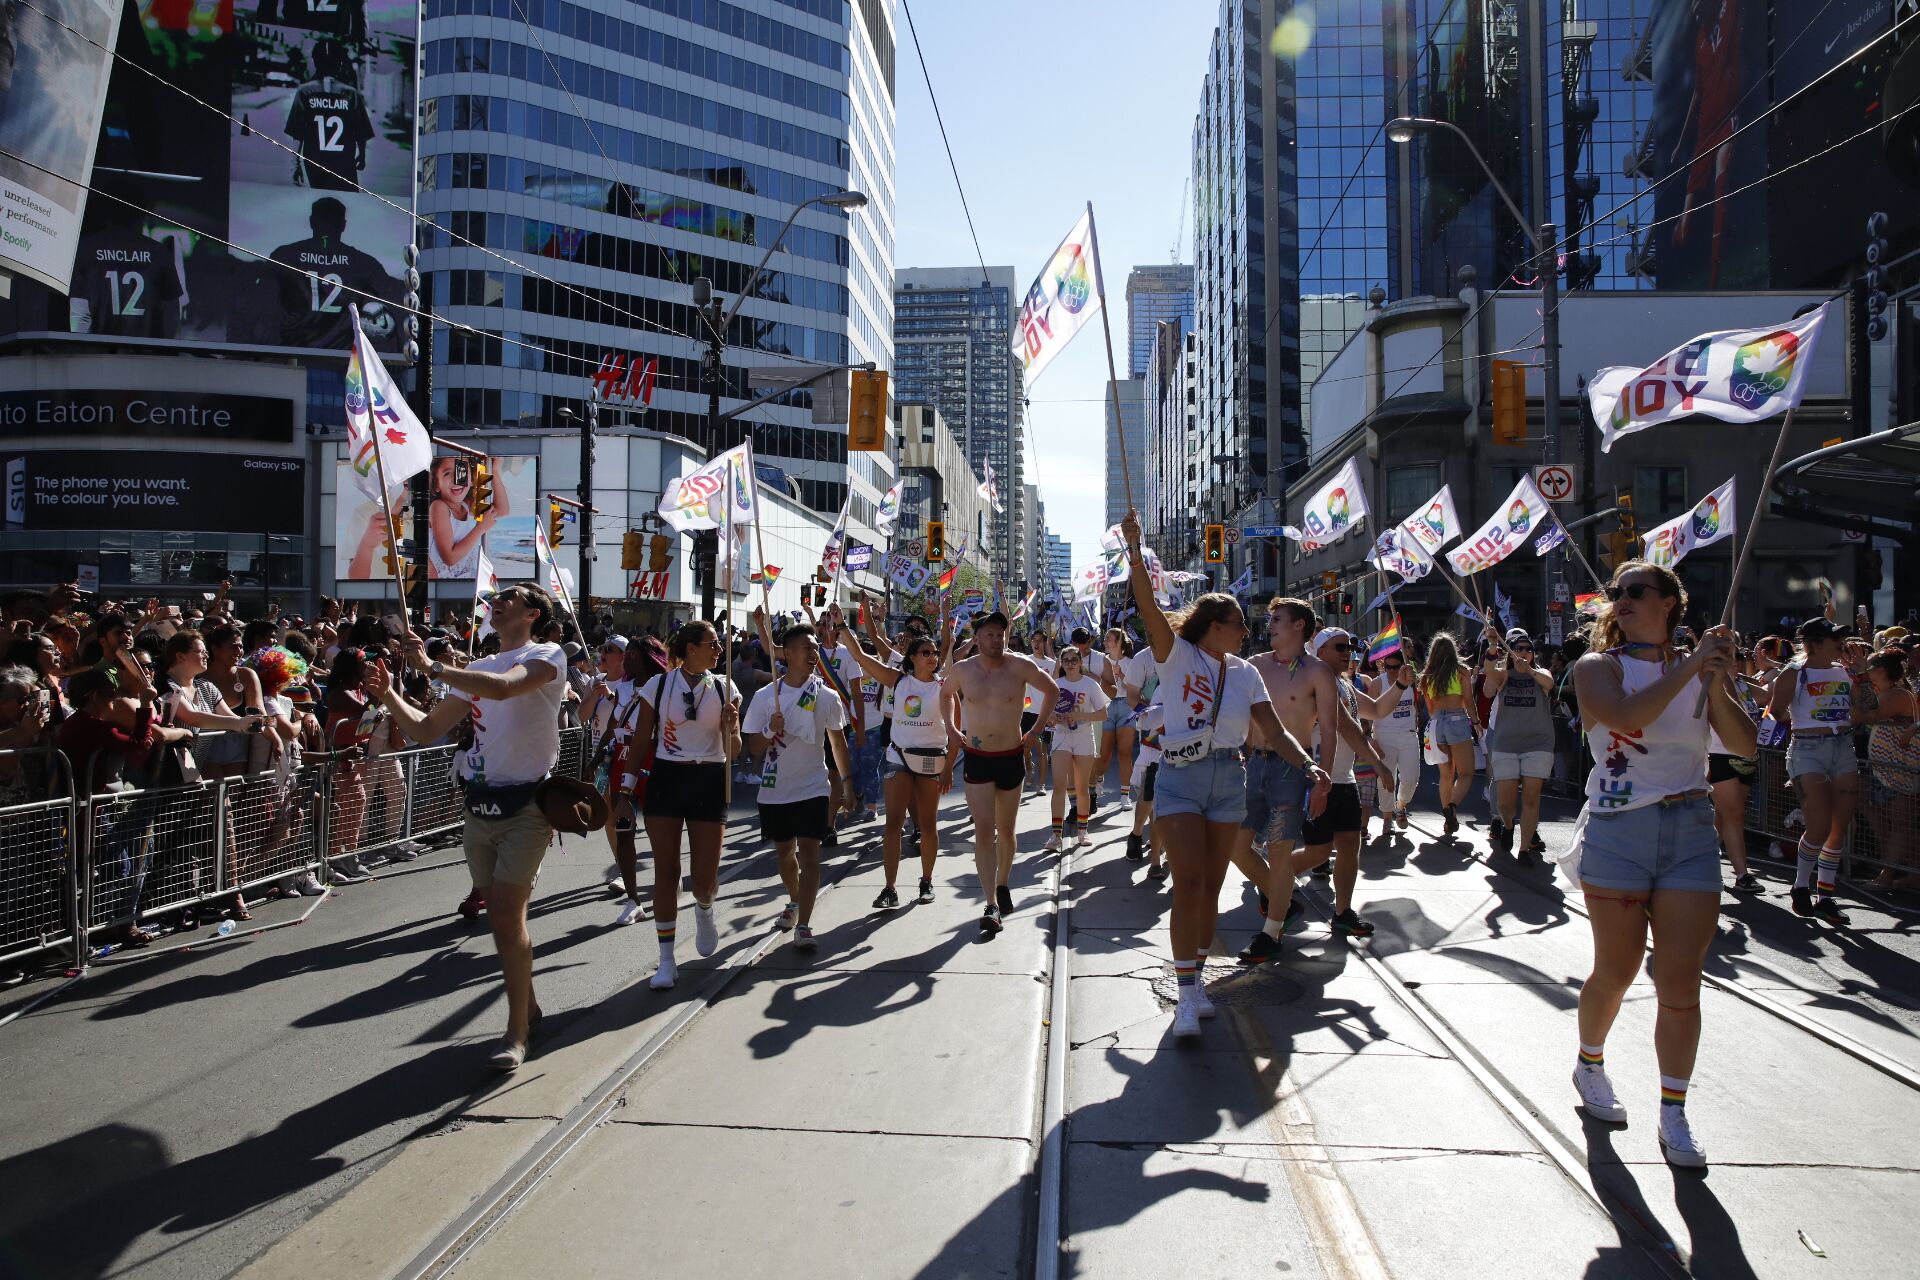 The Team Canada squad march in the Pride Parade holding flags.